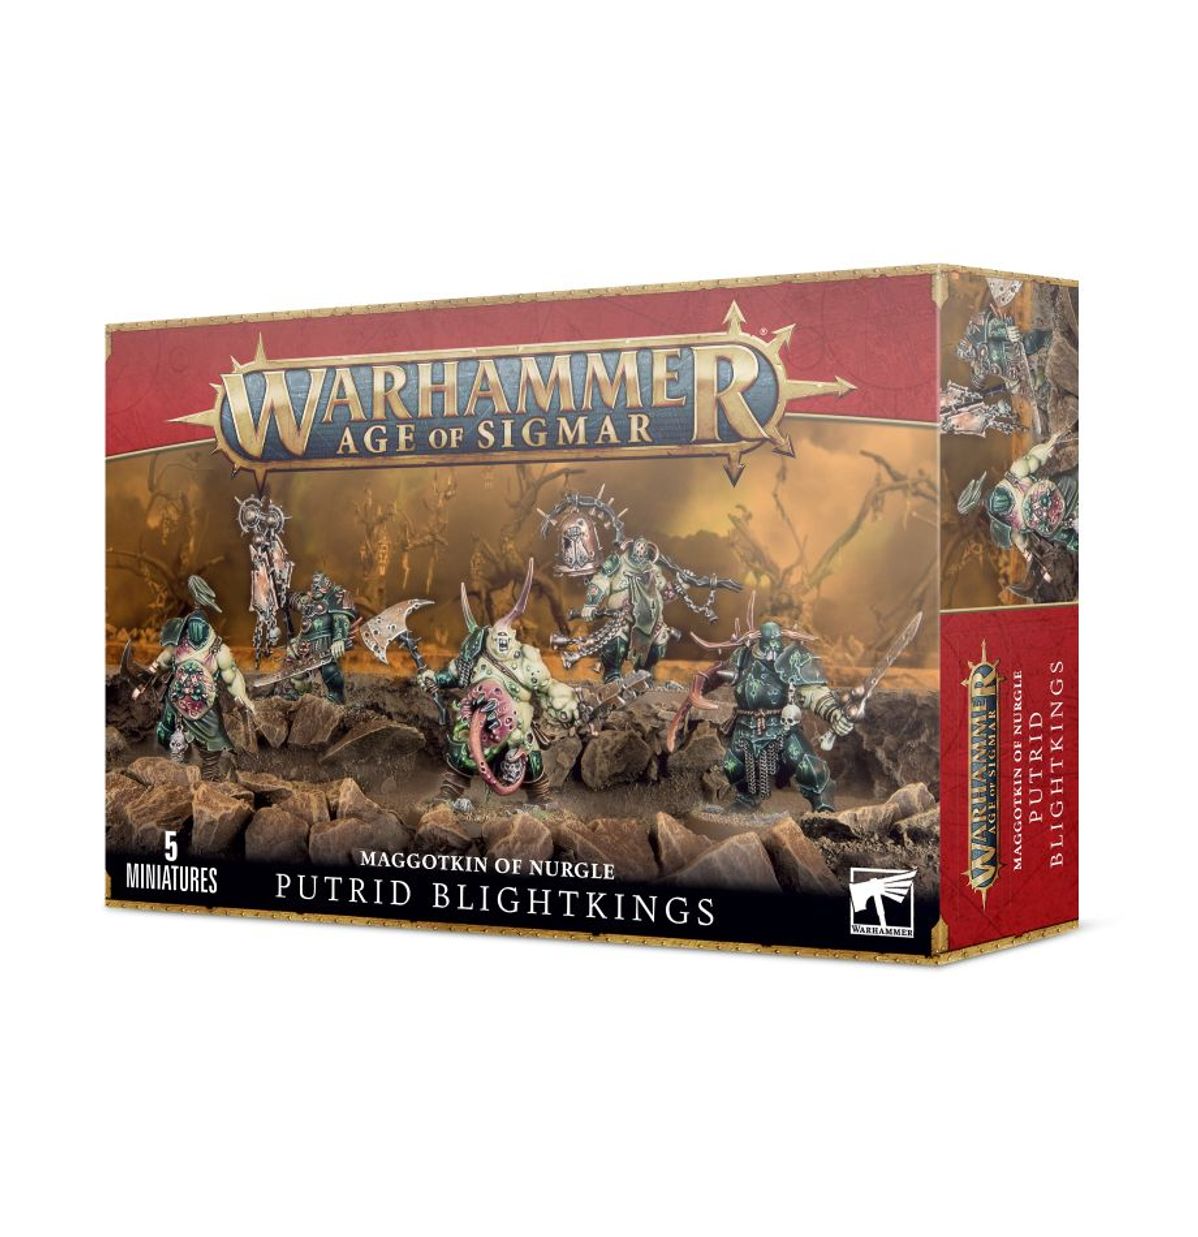 a box of warhammer age of sigmar figures